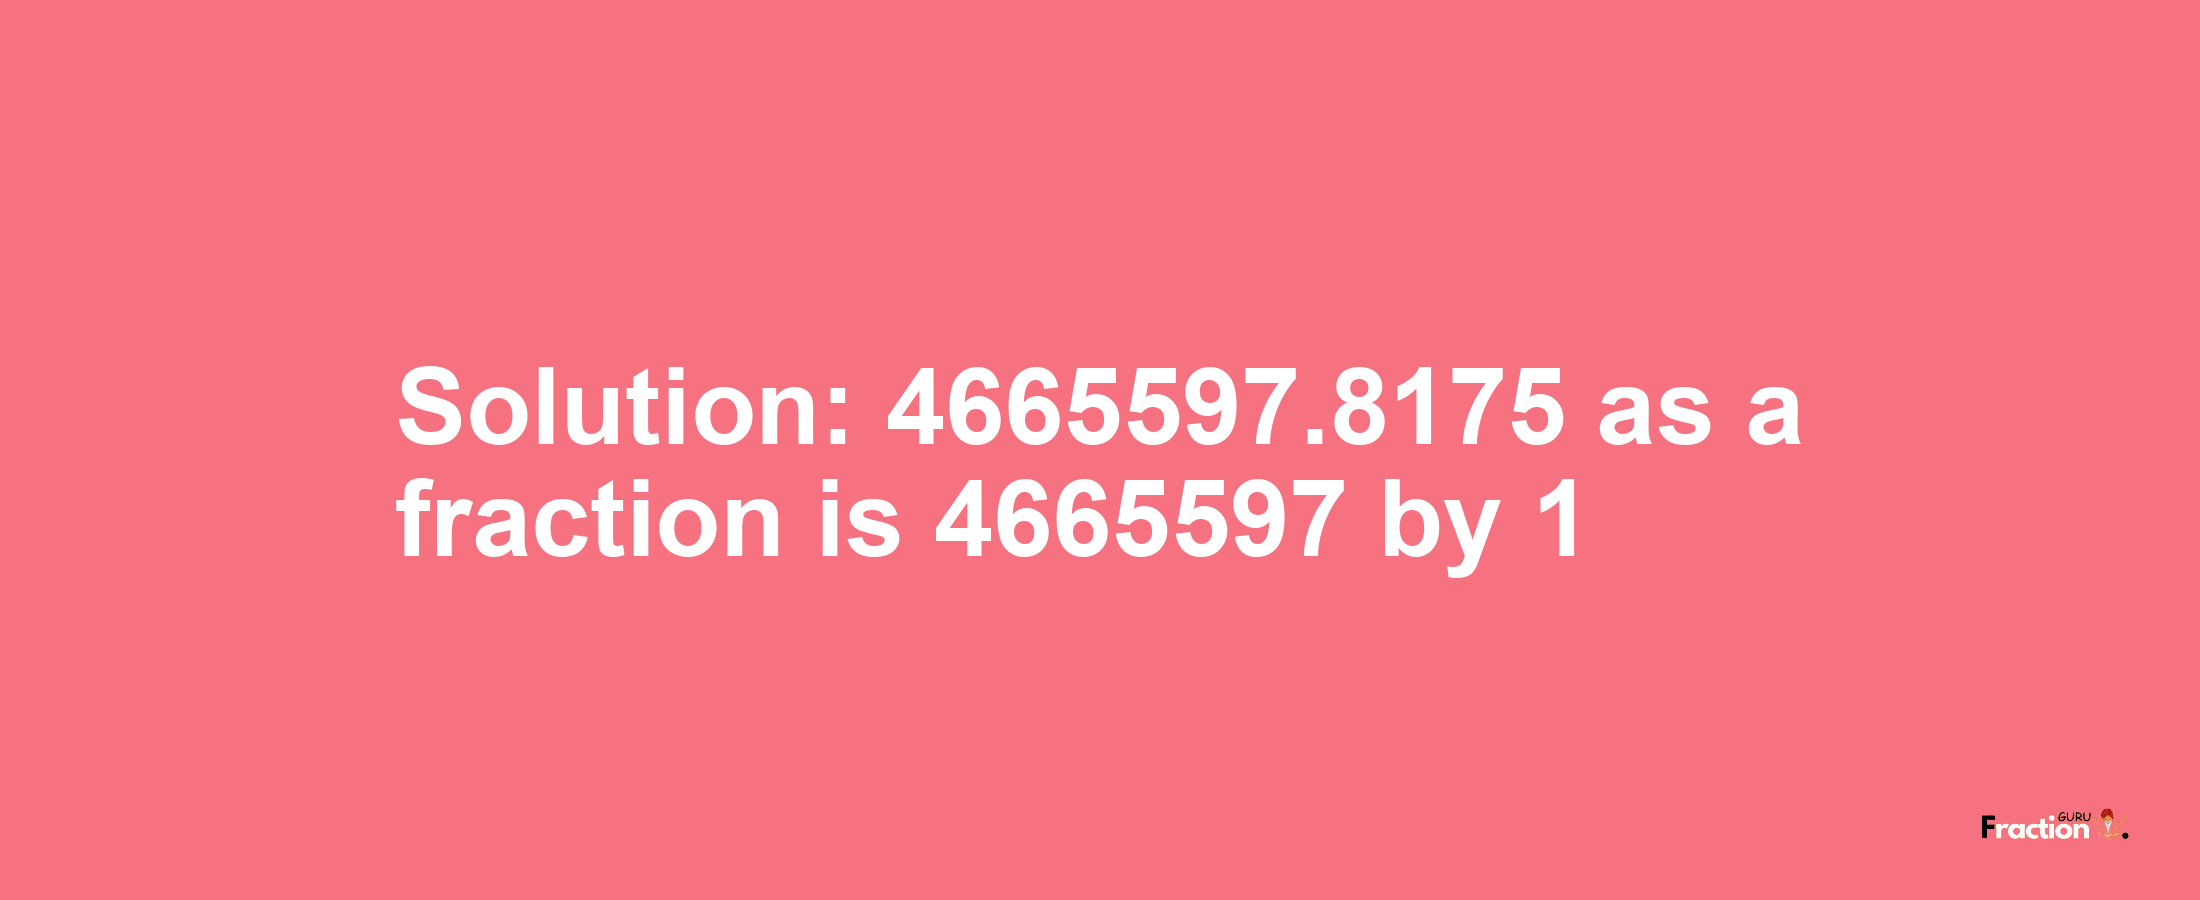 Solution:4665597.8175 as a fraction is 4665597/1